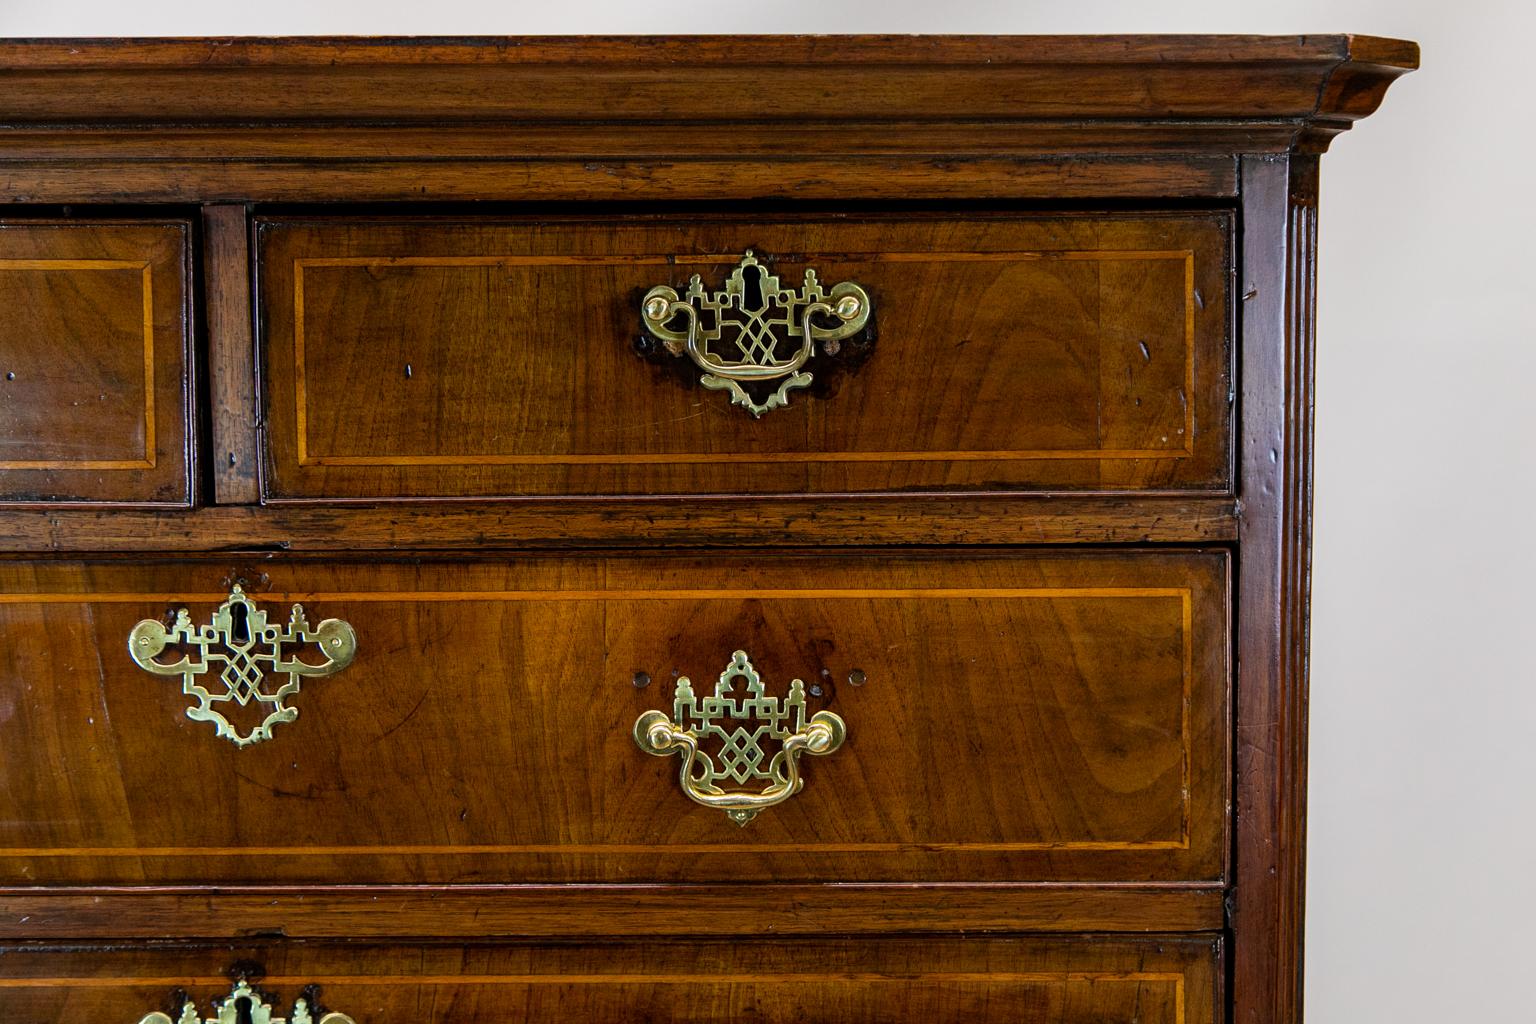 The drawers of this English walnut chest on chest are inlaid with boxwood string. The brasses are not original but are fine handmade replicas. There are ghost stains from previous hardware on the drawer fronts. The drawers are graduated from top to